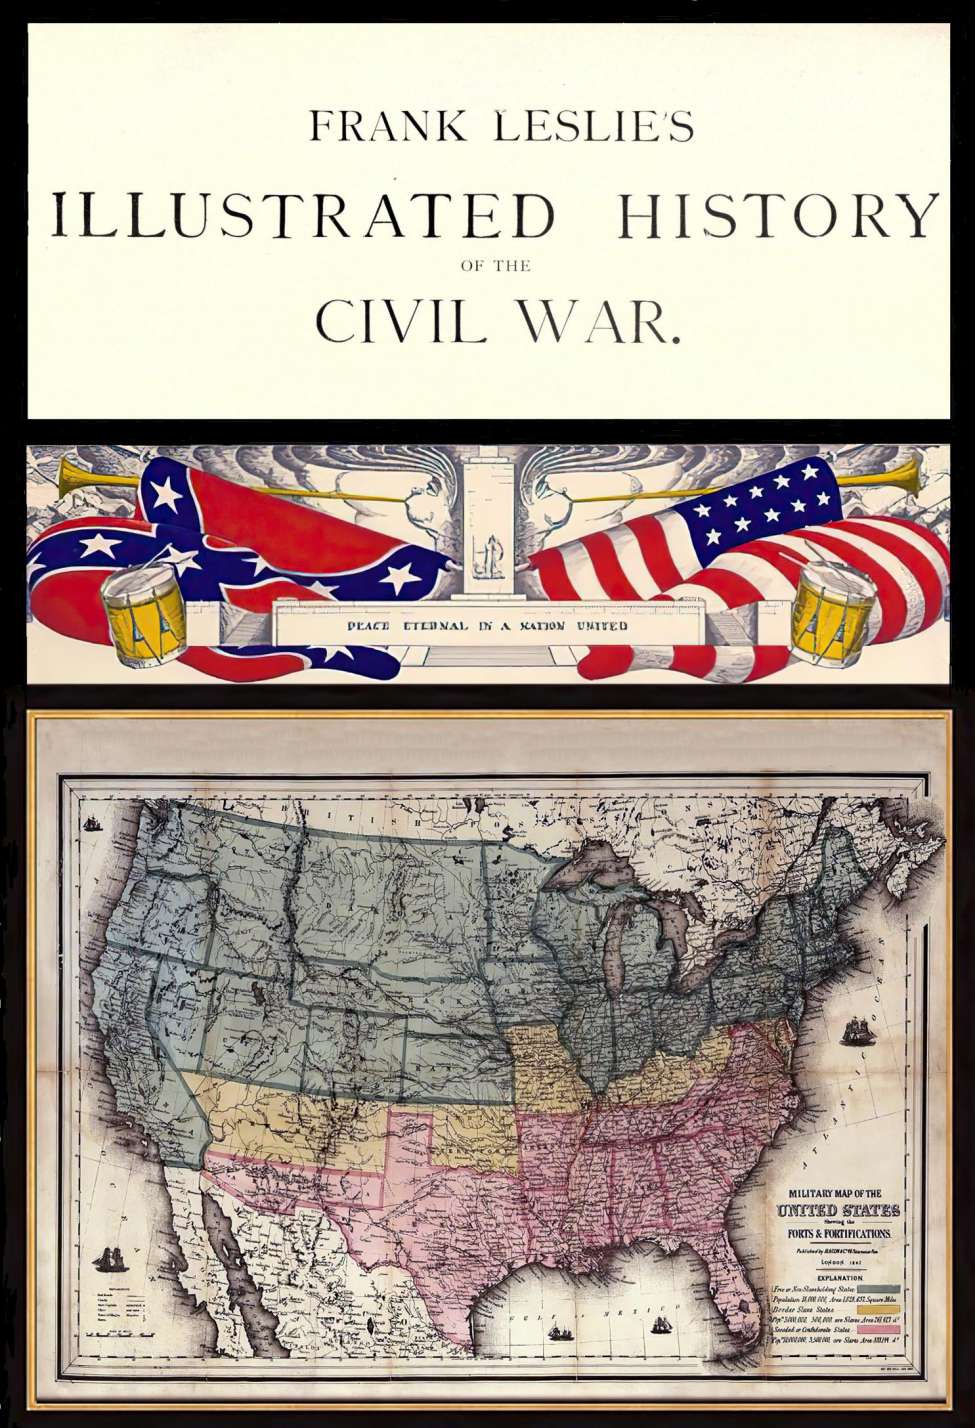 Comic Book Cover For Frank Leslie's Illustrated History of the Civil War